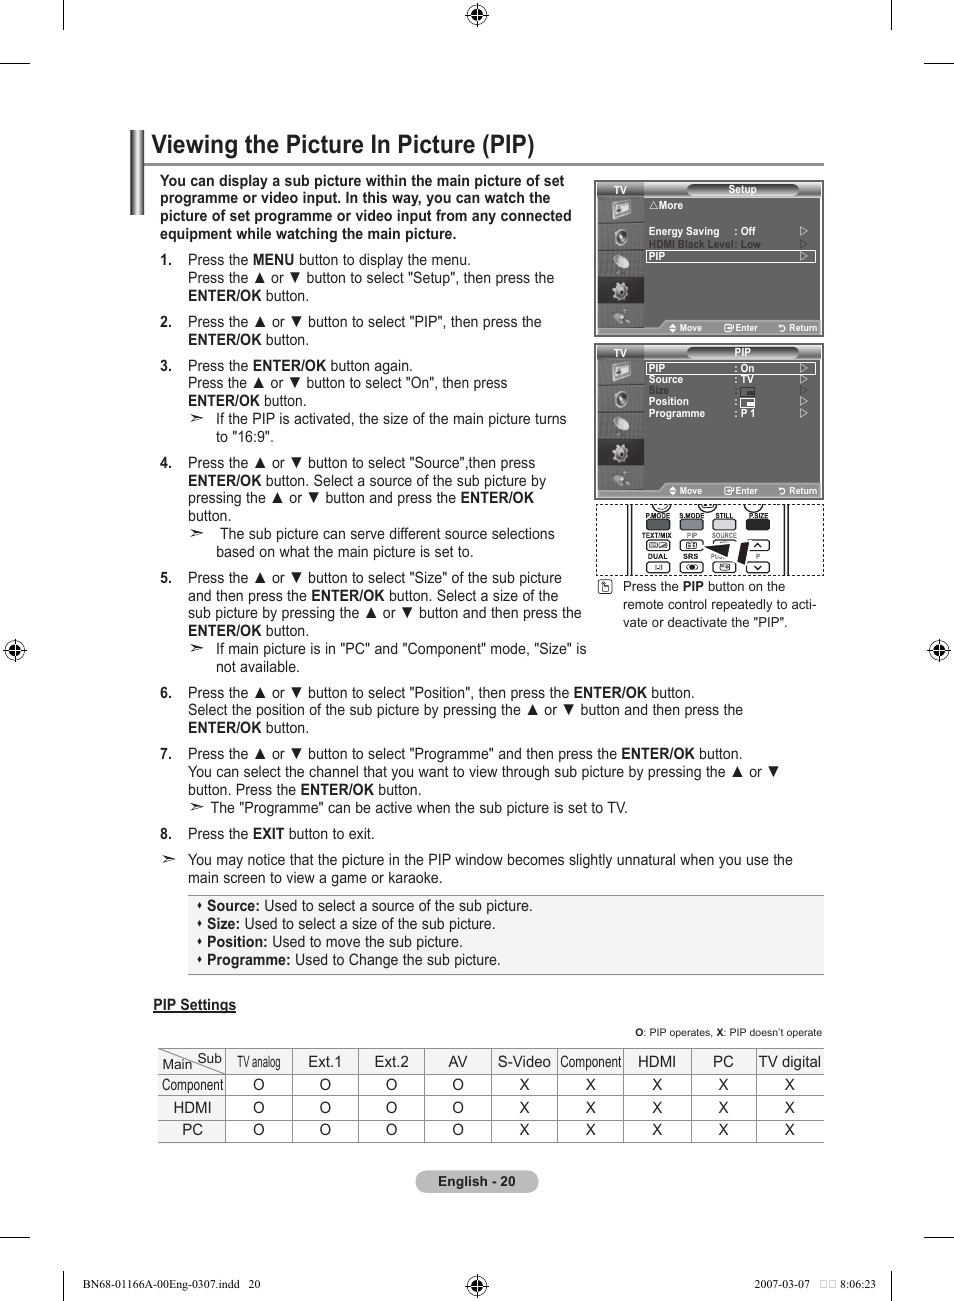 Viewing the picture in picture (pip) | Samsung LE32R8 User Manual | Page 22 / 559